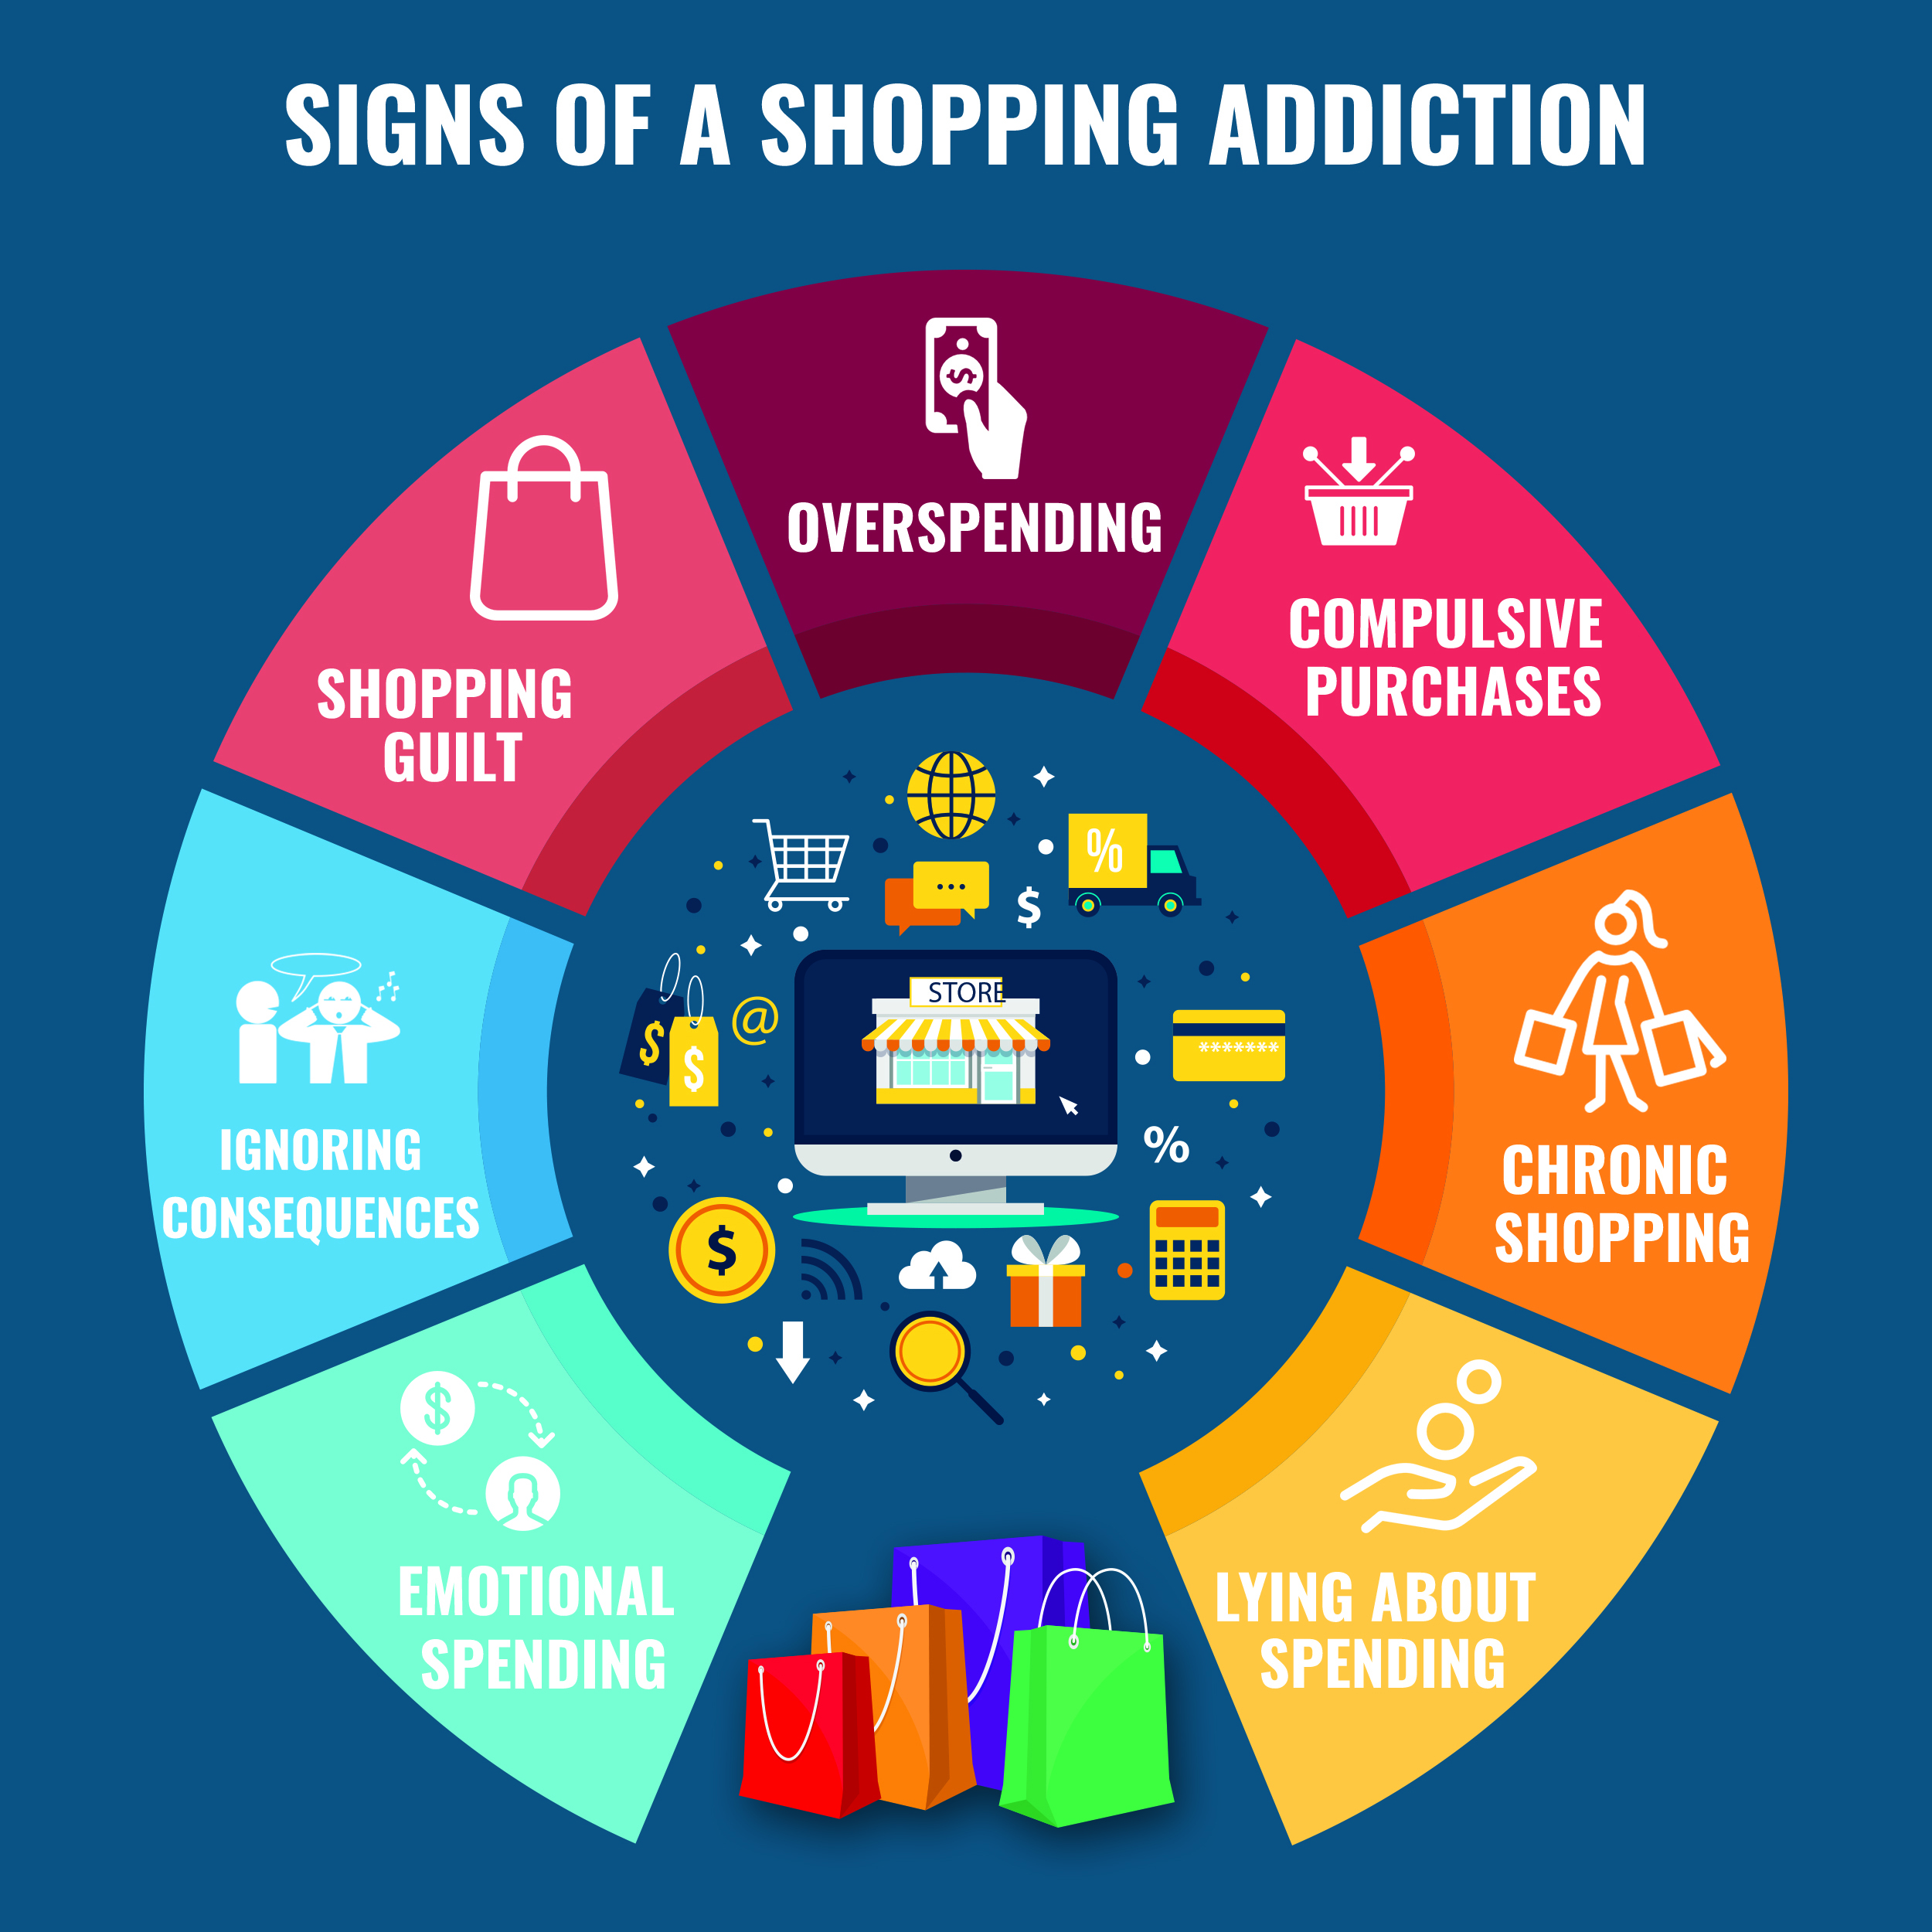 How To Stop Online Shopping Addiction? Recovery Realization